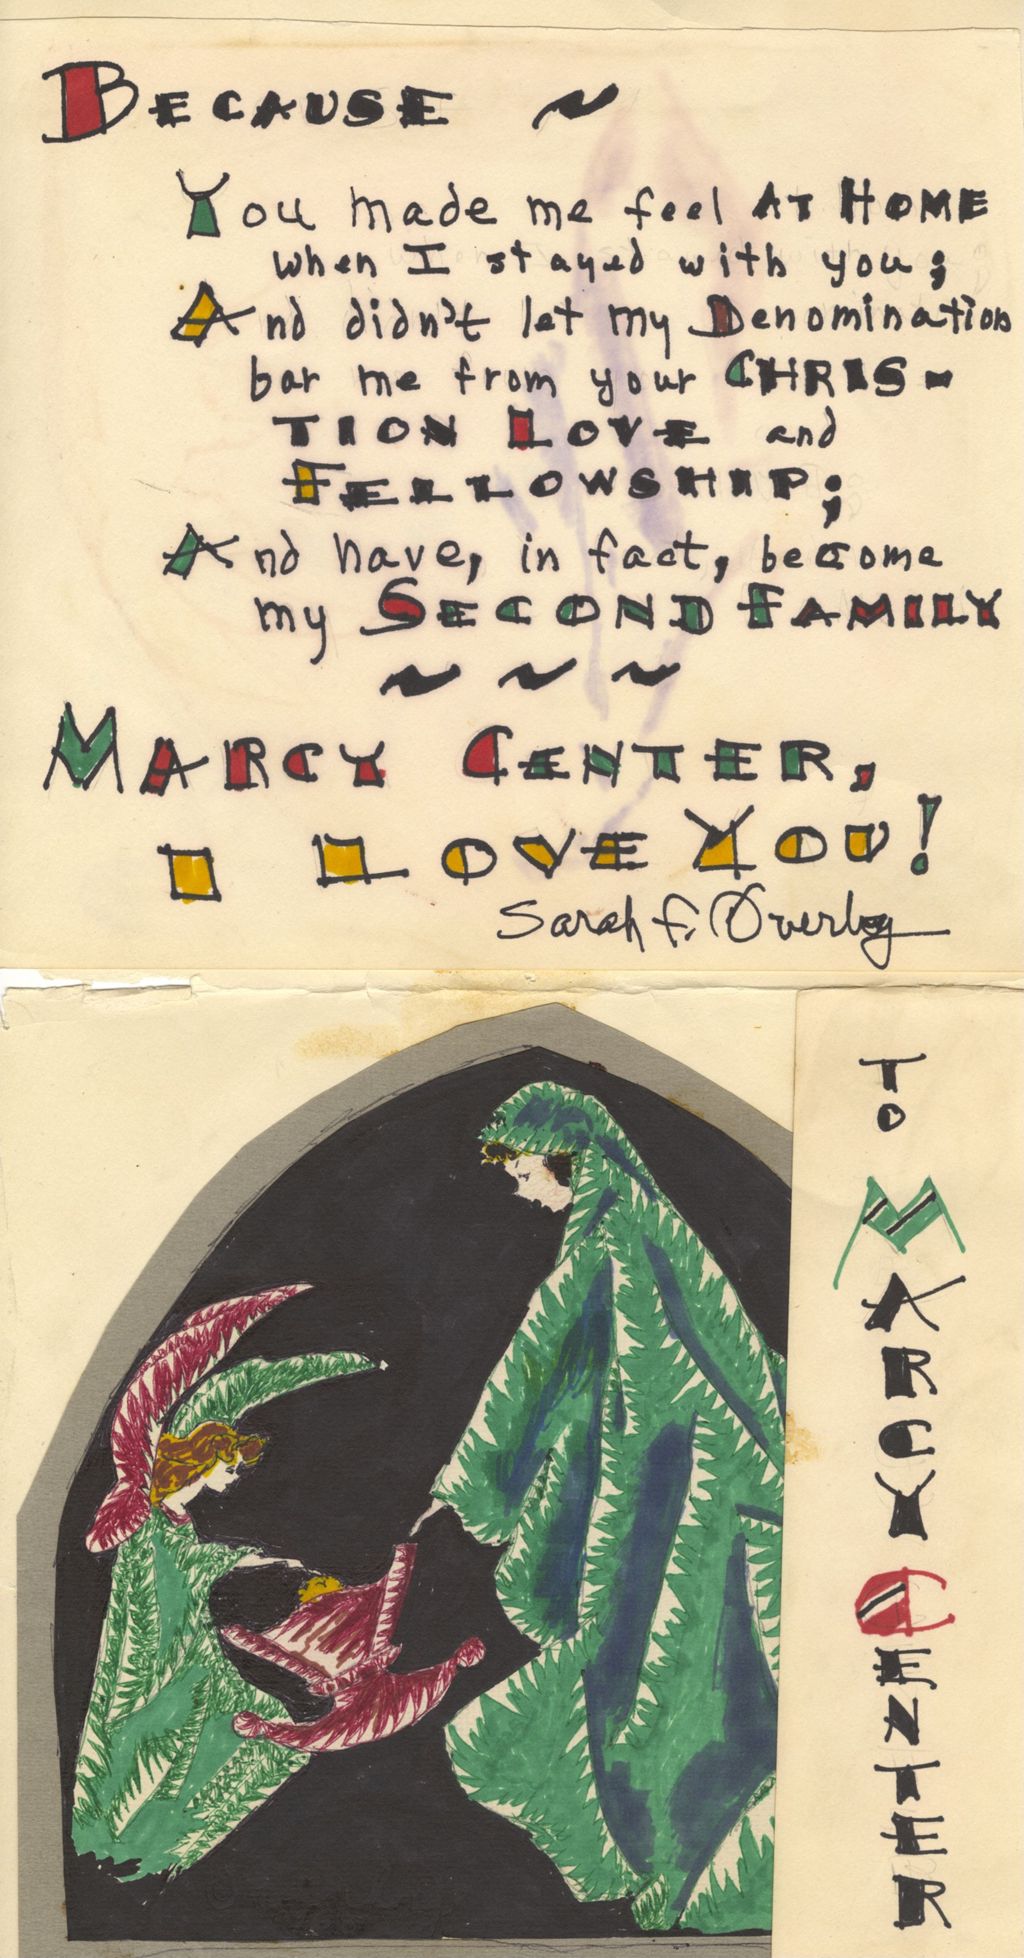 Miniature of Hand-made Christmas card sent to Marcy Center